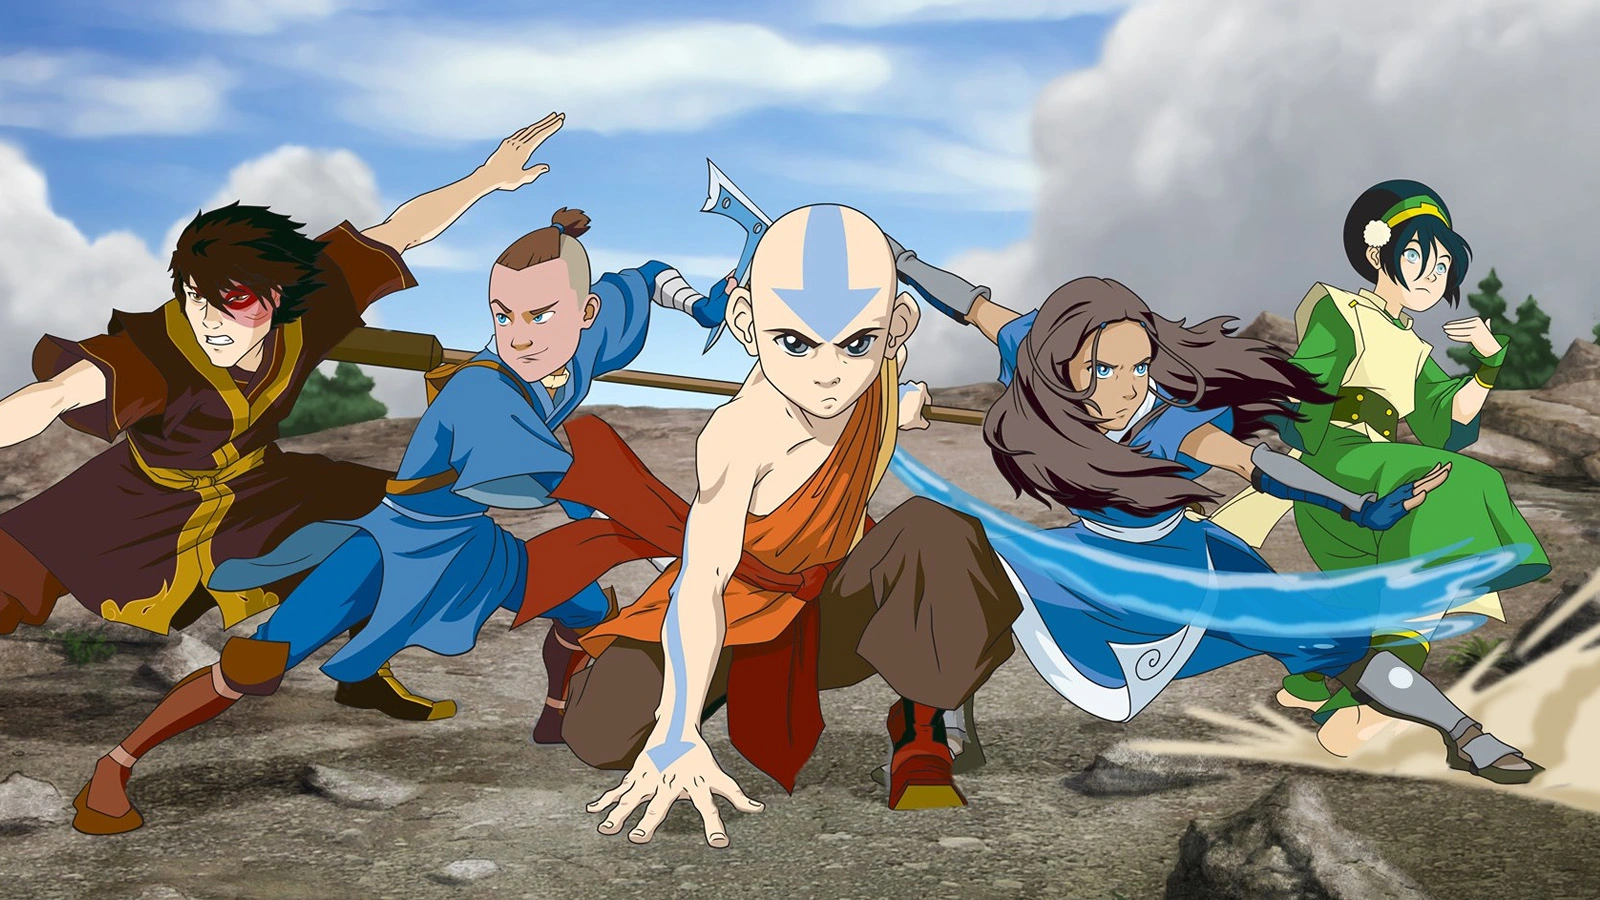 Fortnite x Avatar: The Last Airbender – Completing Light Chakra Quests